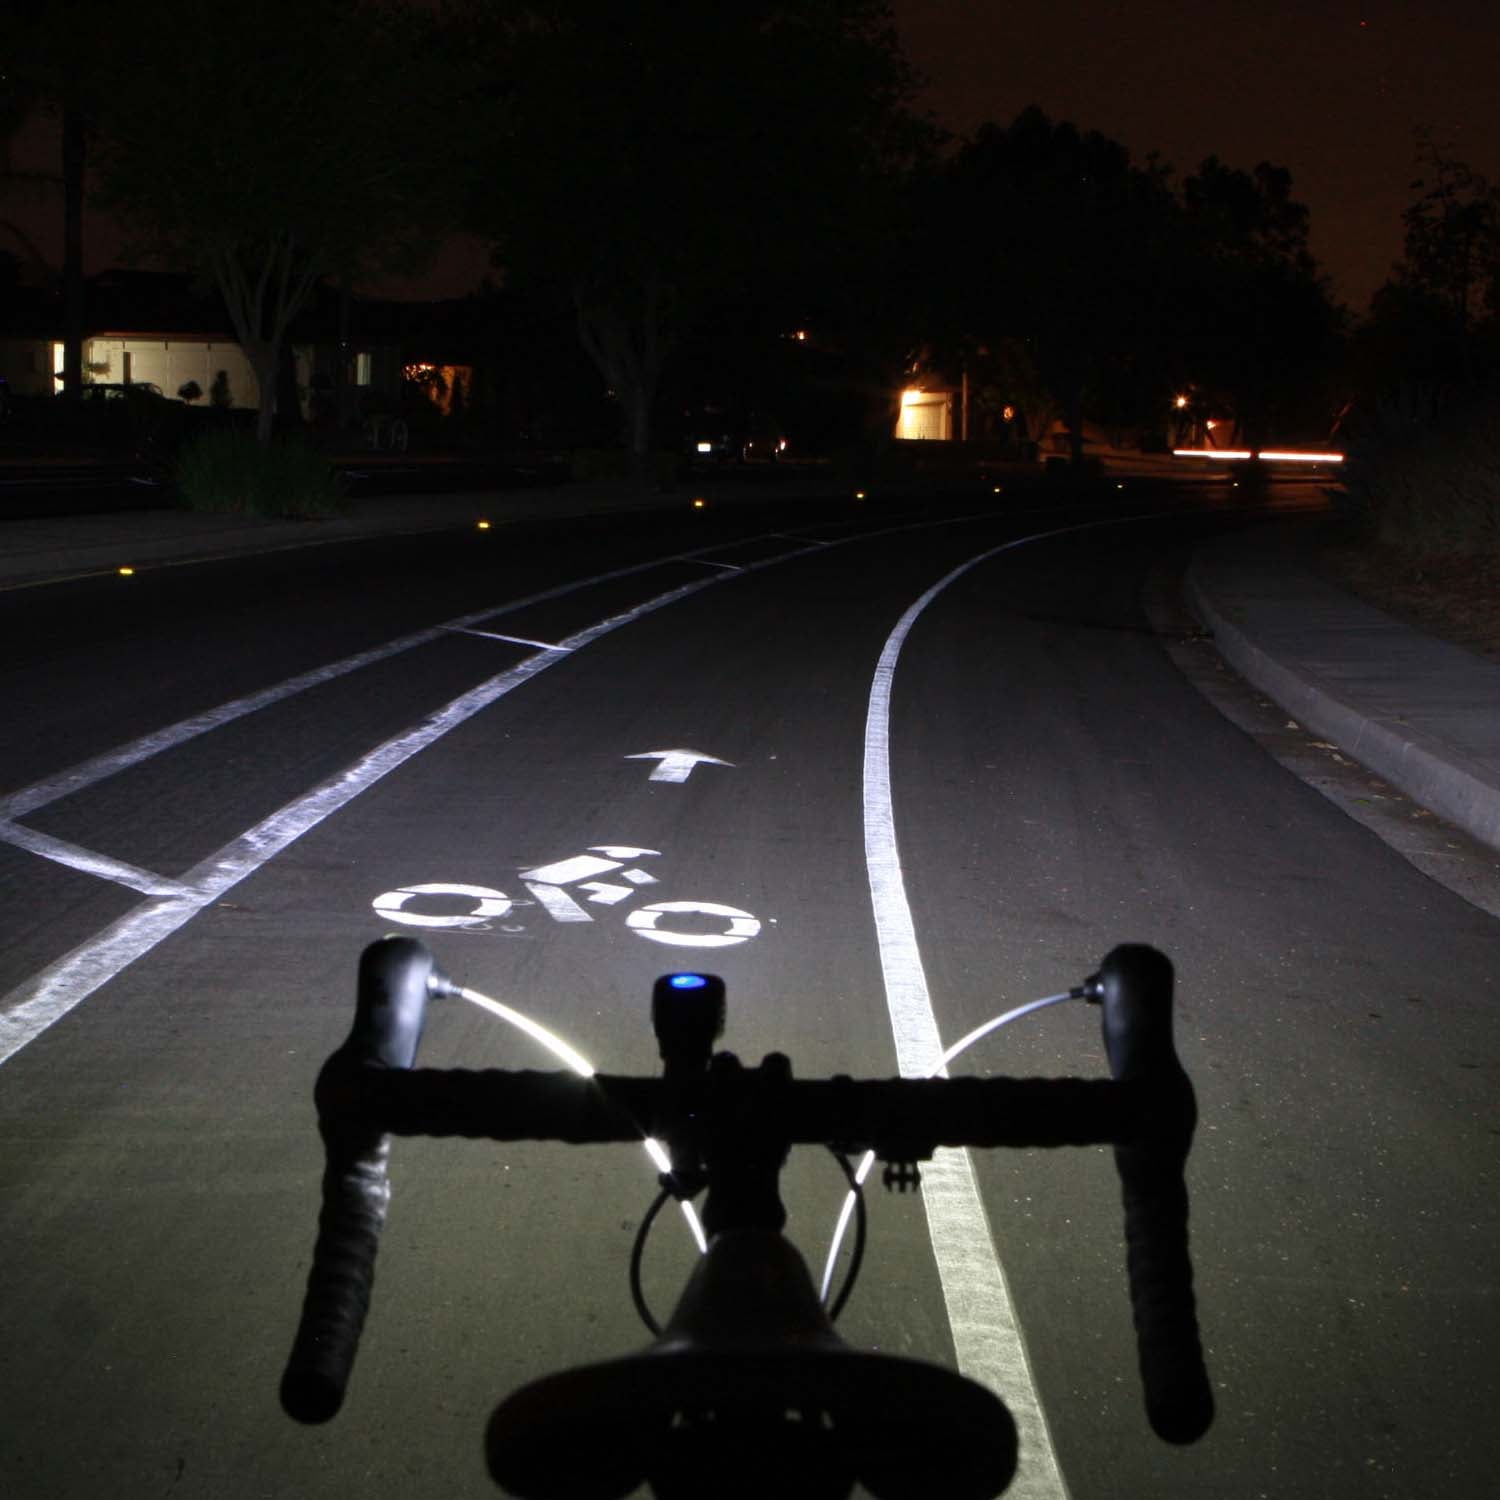 Niterider Digital Patrol Combo Lighting, Siren and Taillight System –  Bicycle Patrol Outfitters, LLC